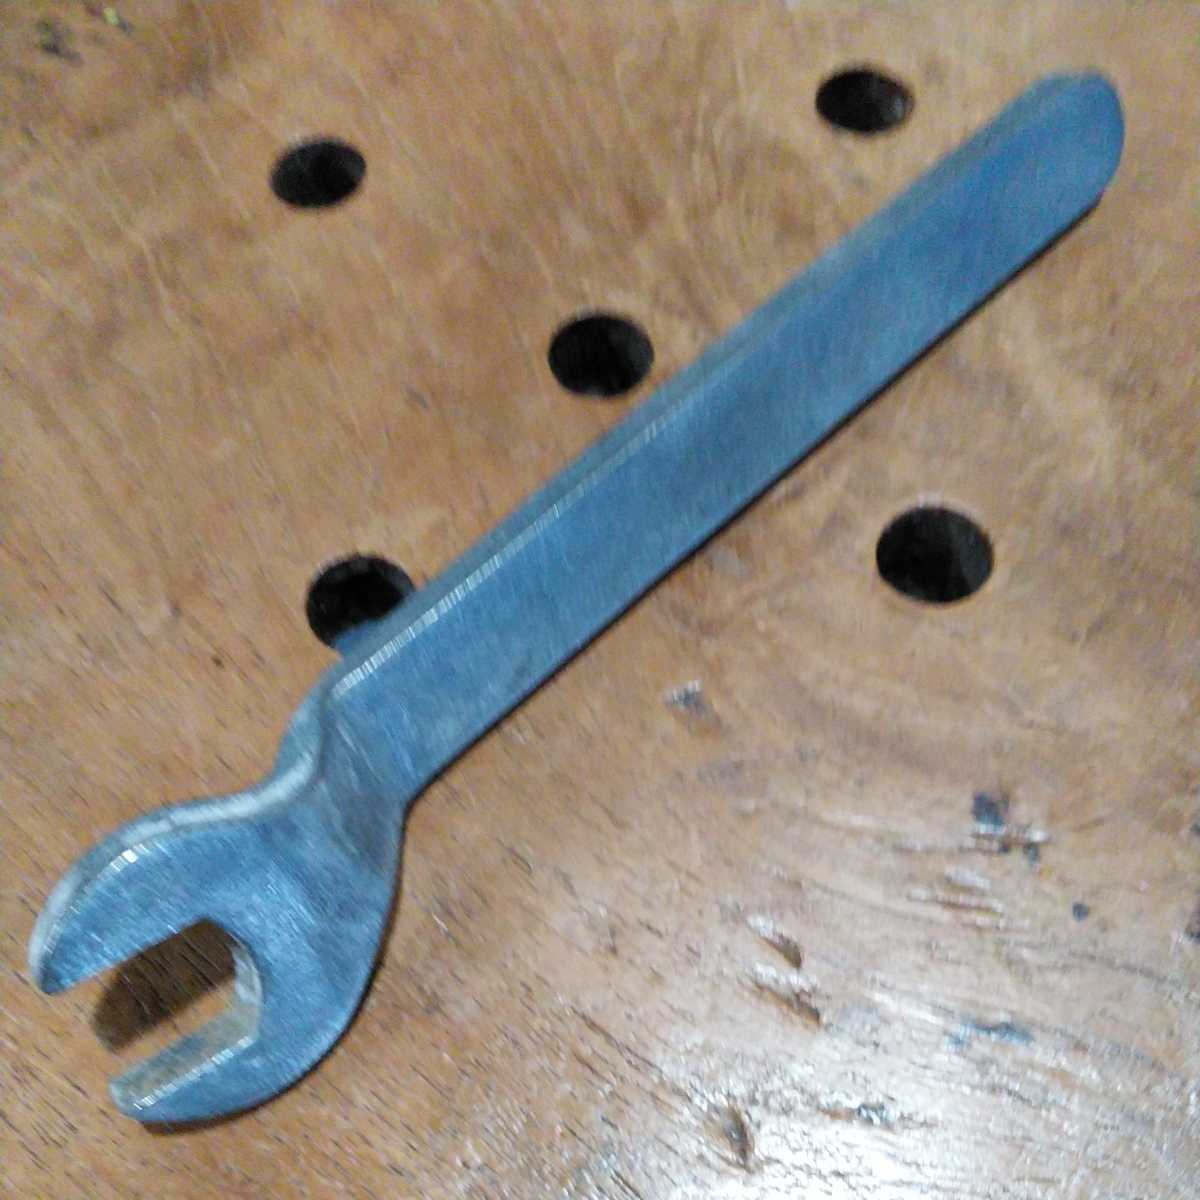  loaded tool maintenance for tool one-side . spanner spanner. size 14mm. total length 160.0mm. thickness 6.2mm. offset 13.0.. Manufacturers unknown 